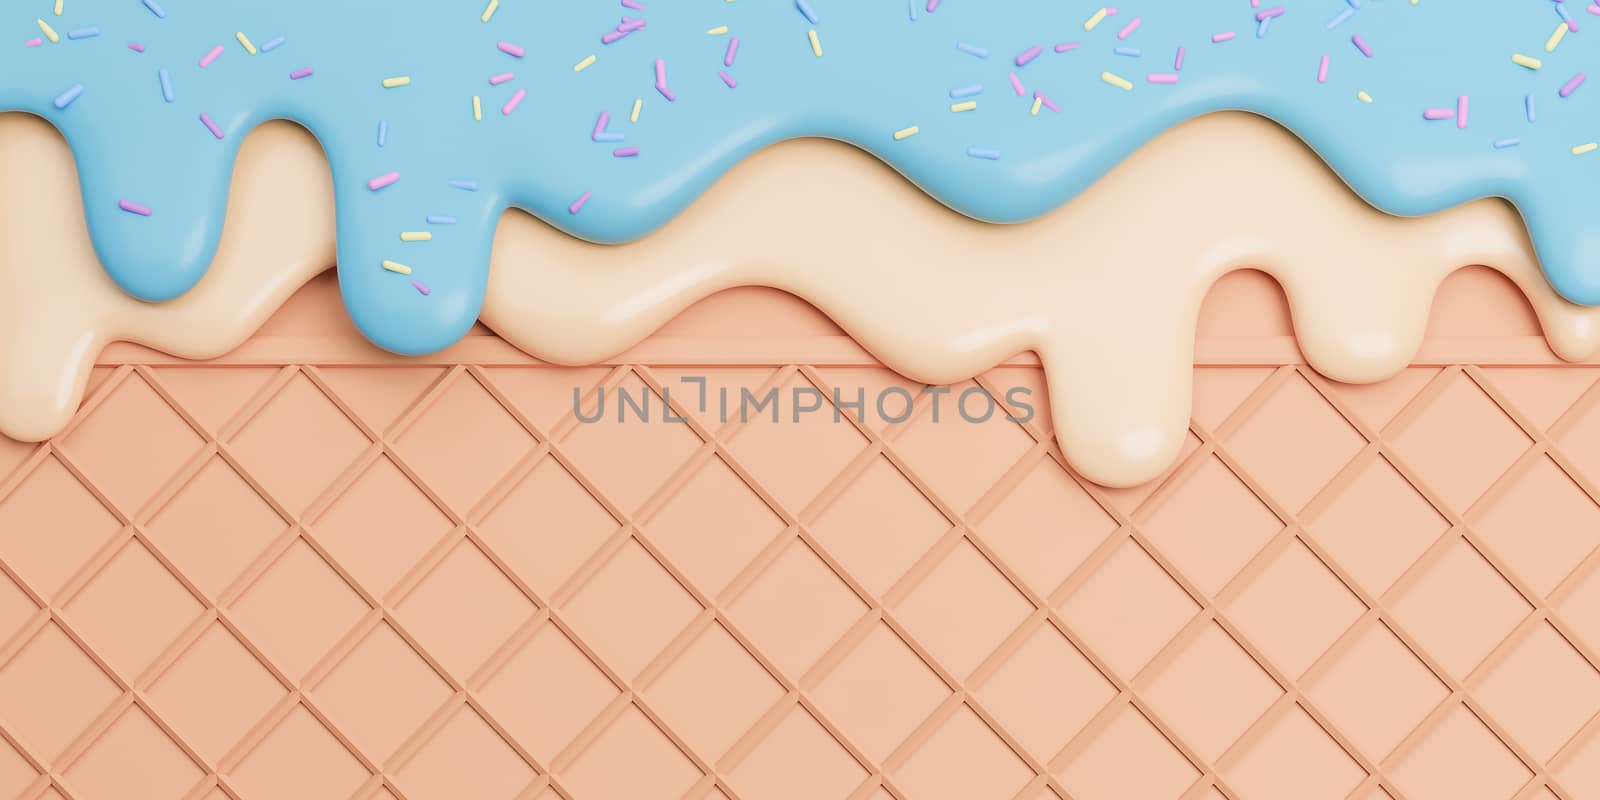 Mint and Vanilla Ice Cream Melted with Sprinkles on Wafer banner Background with copy space.,3d model and illustration.